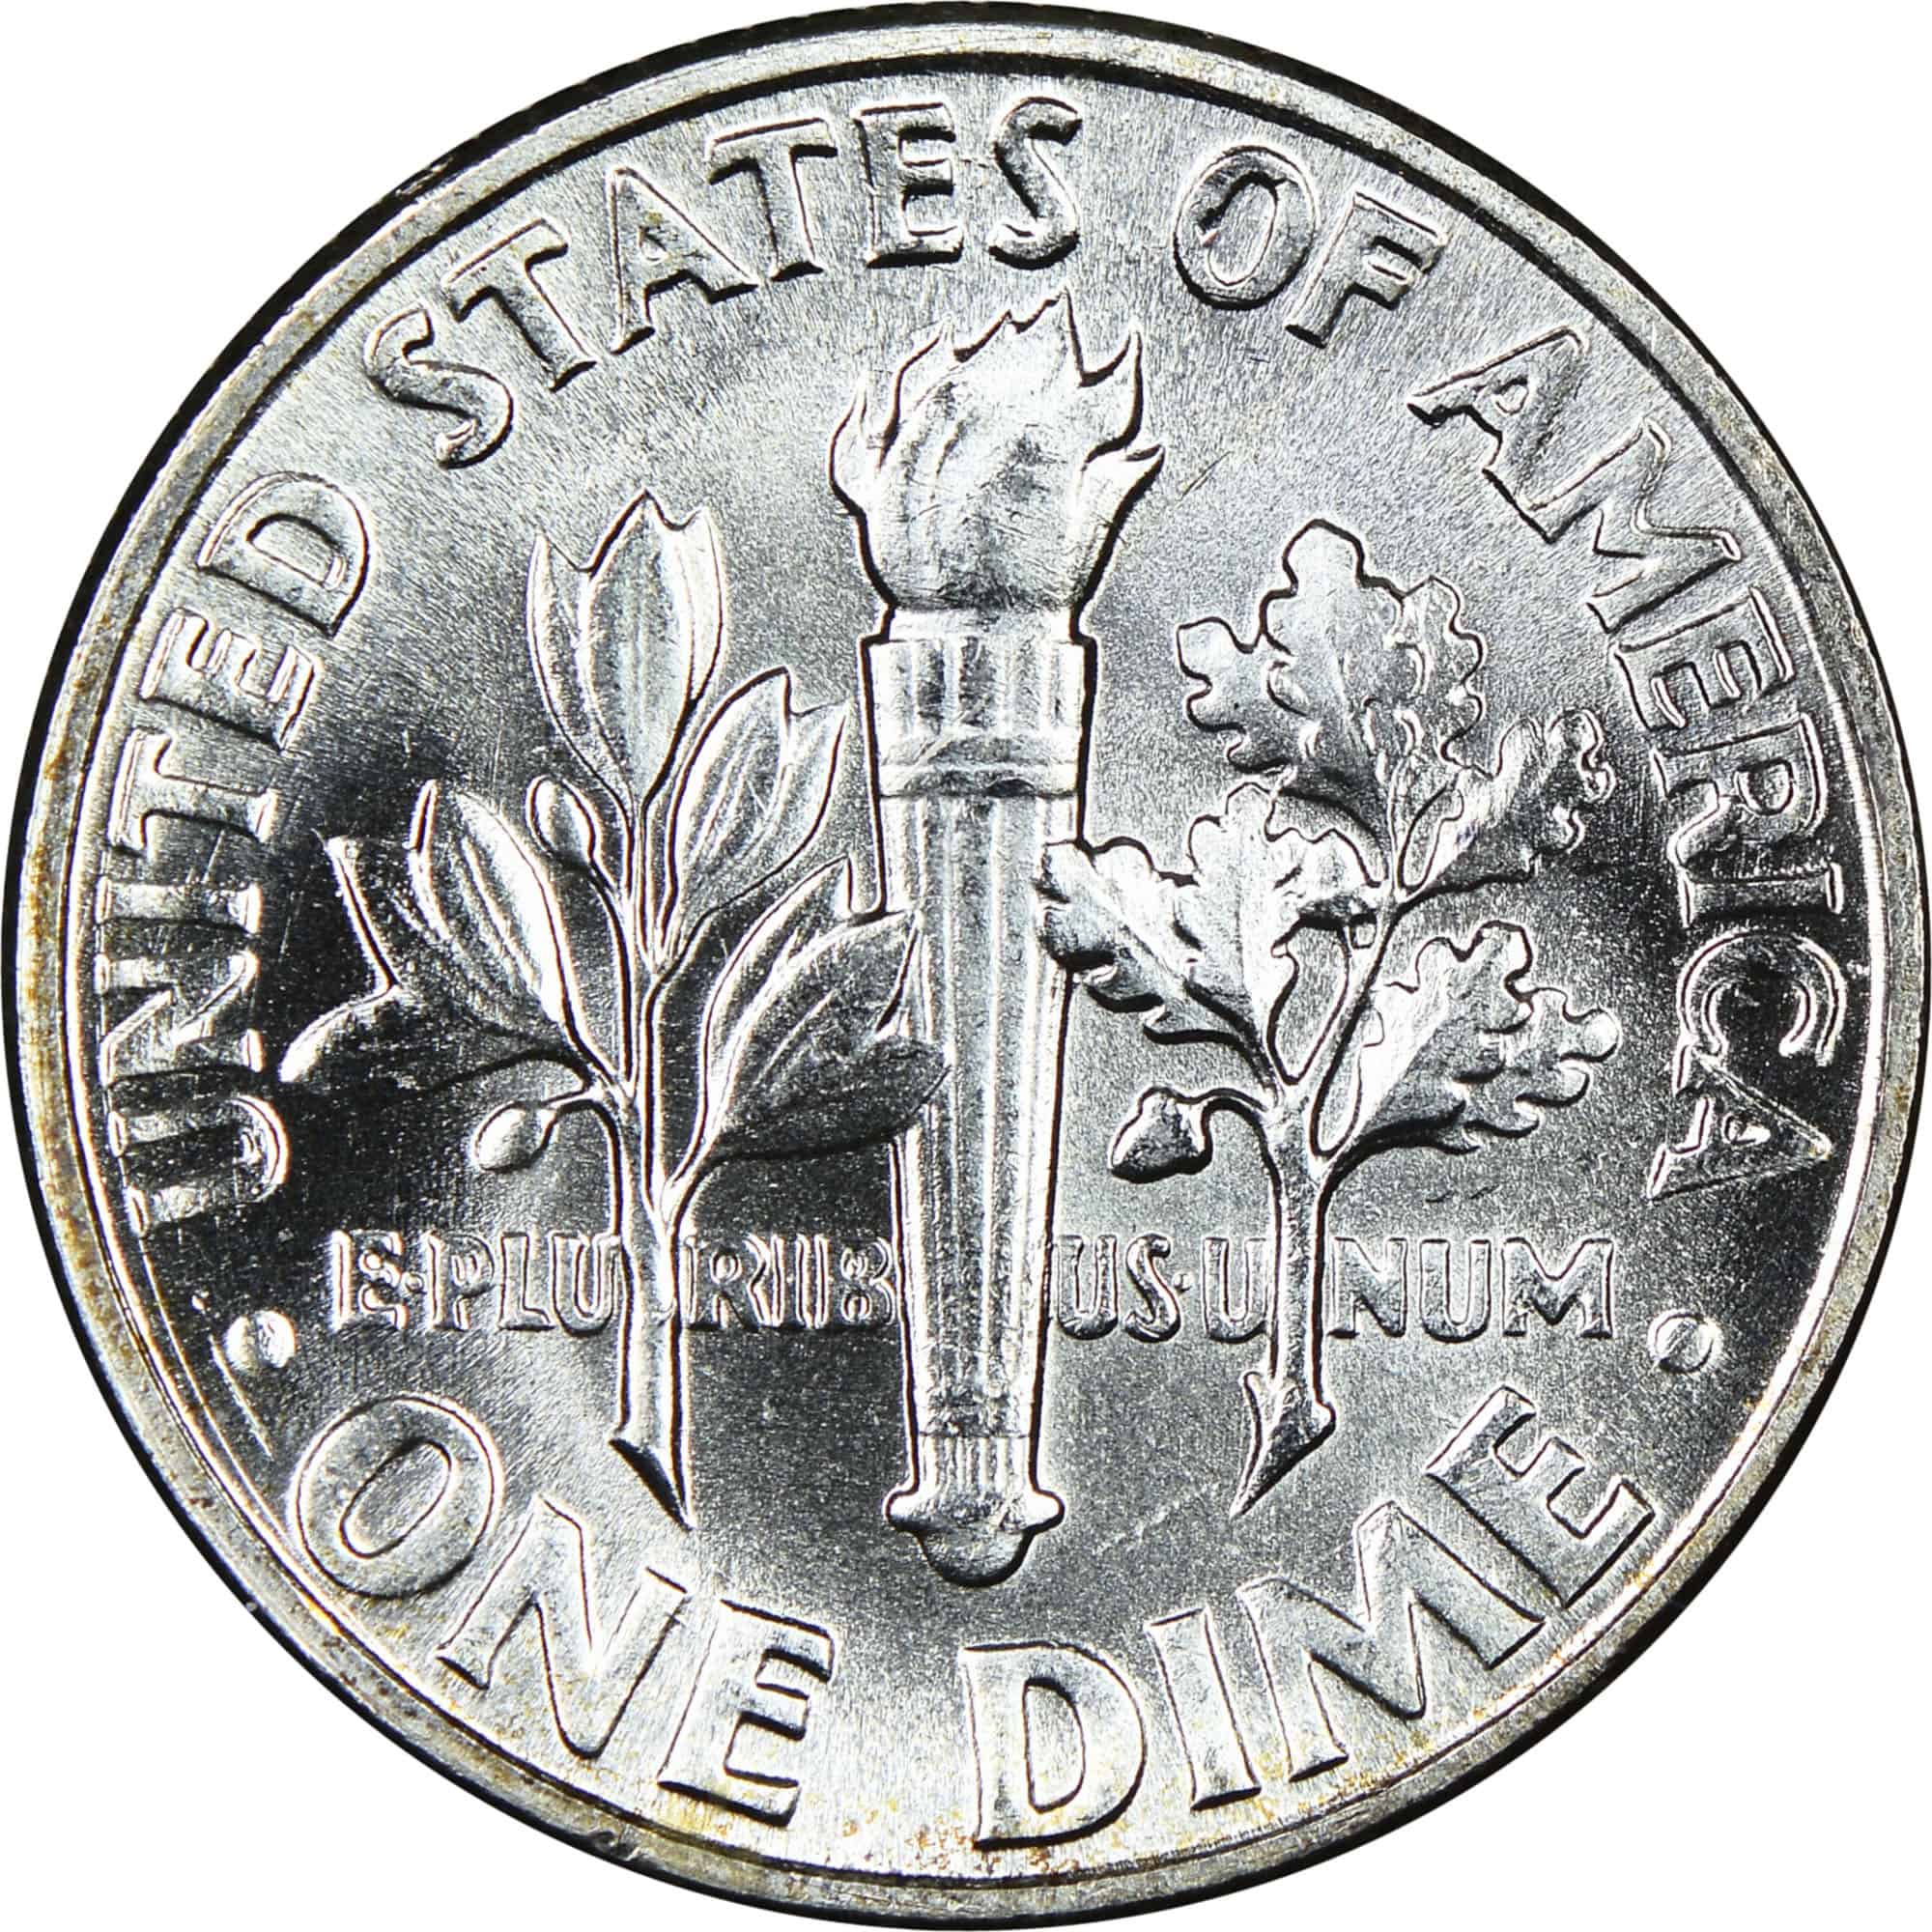 The reverse of the 1951 Roosevelt dime